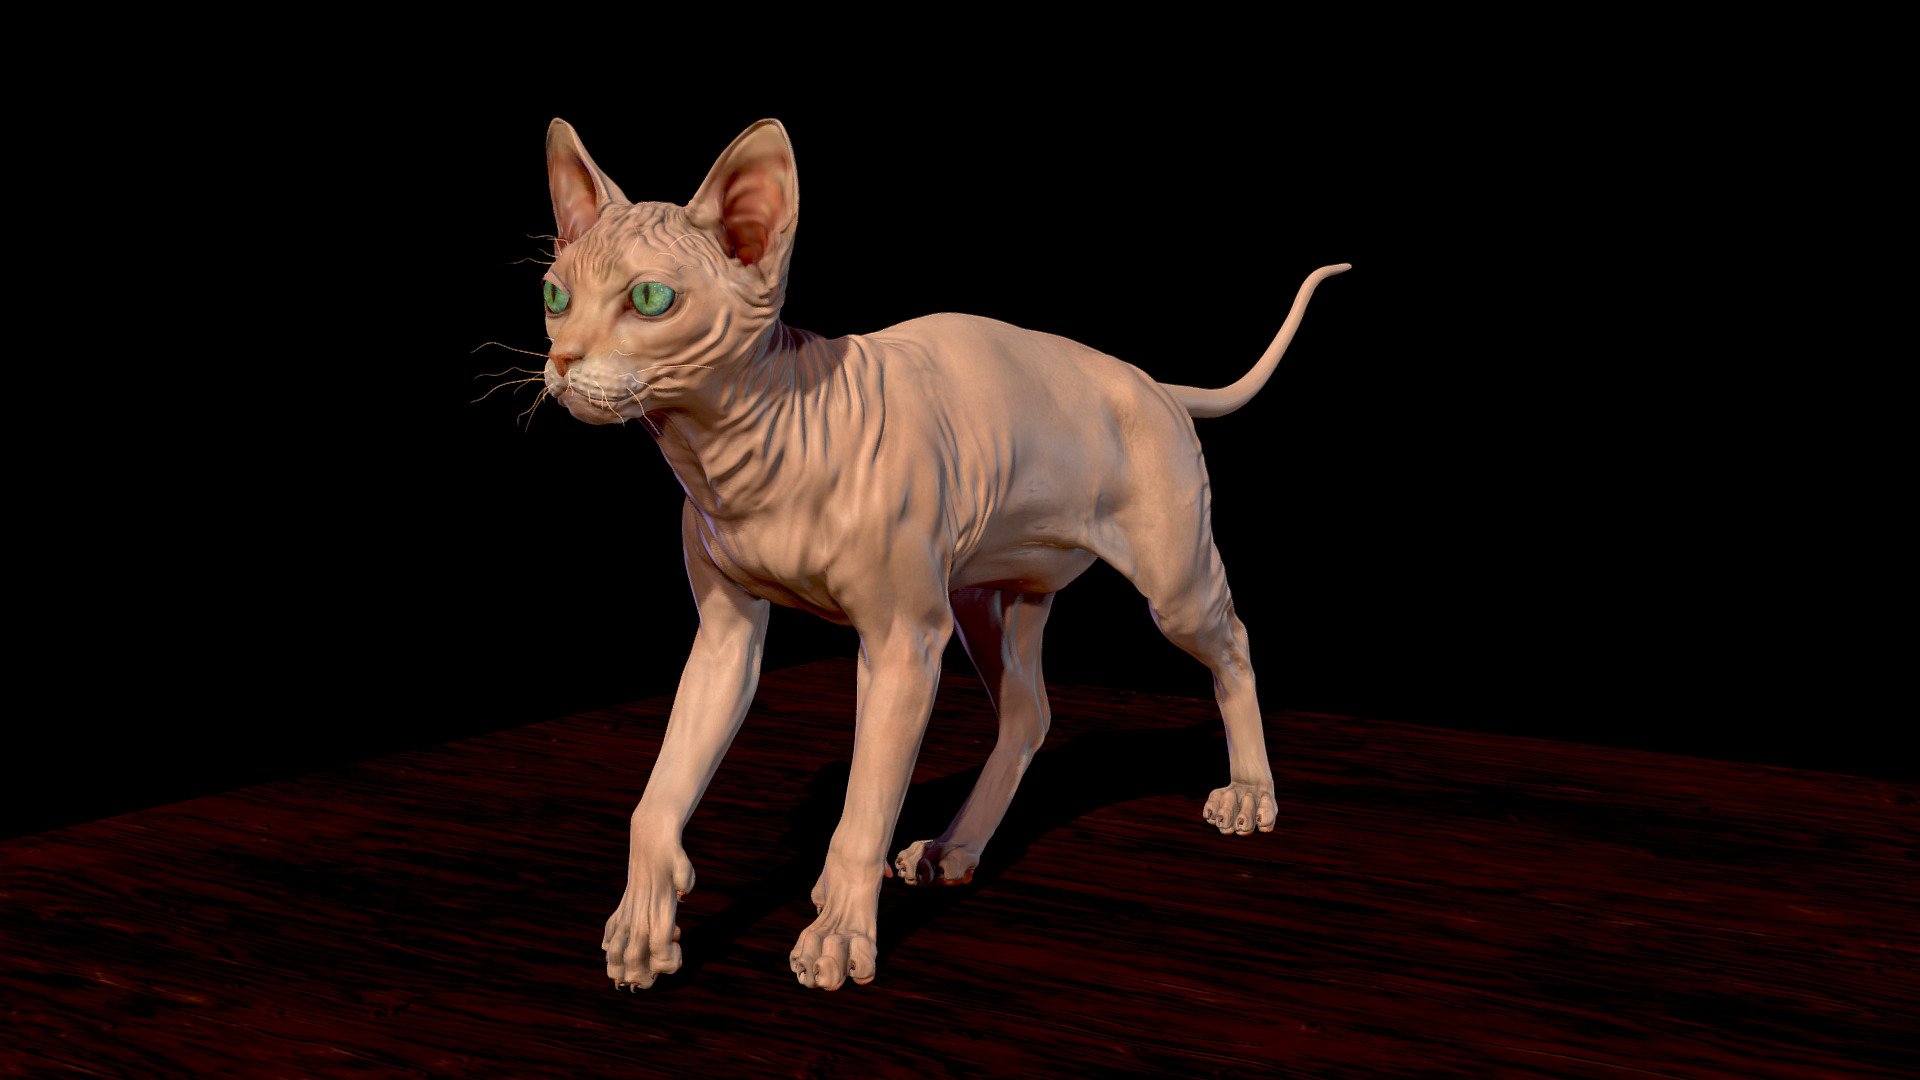 decimated sculpt of hairless sphynx cat
textures handpainted - Sphynx hairless Cat - Buy Royalty Free 3D model by verena boeck (@kling) 3d model